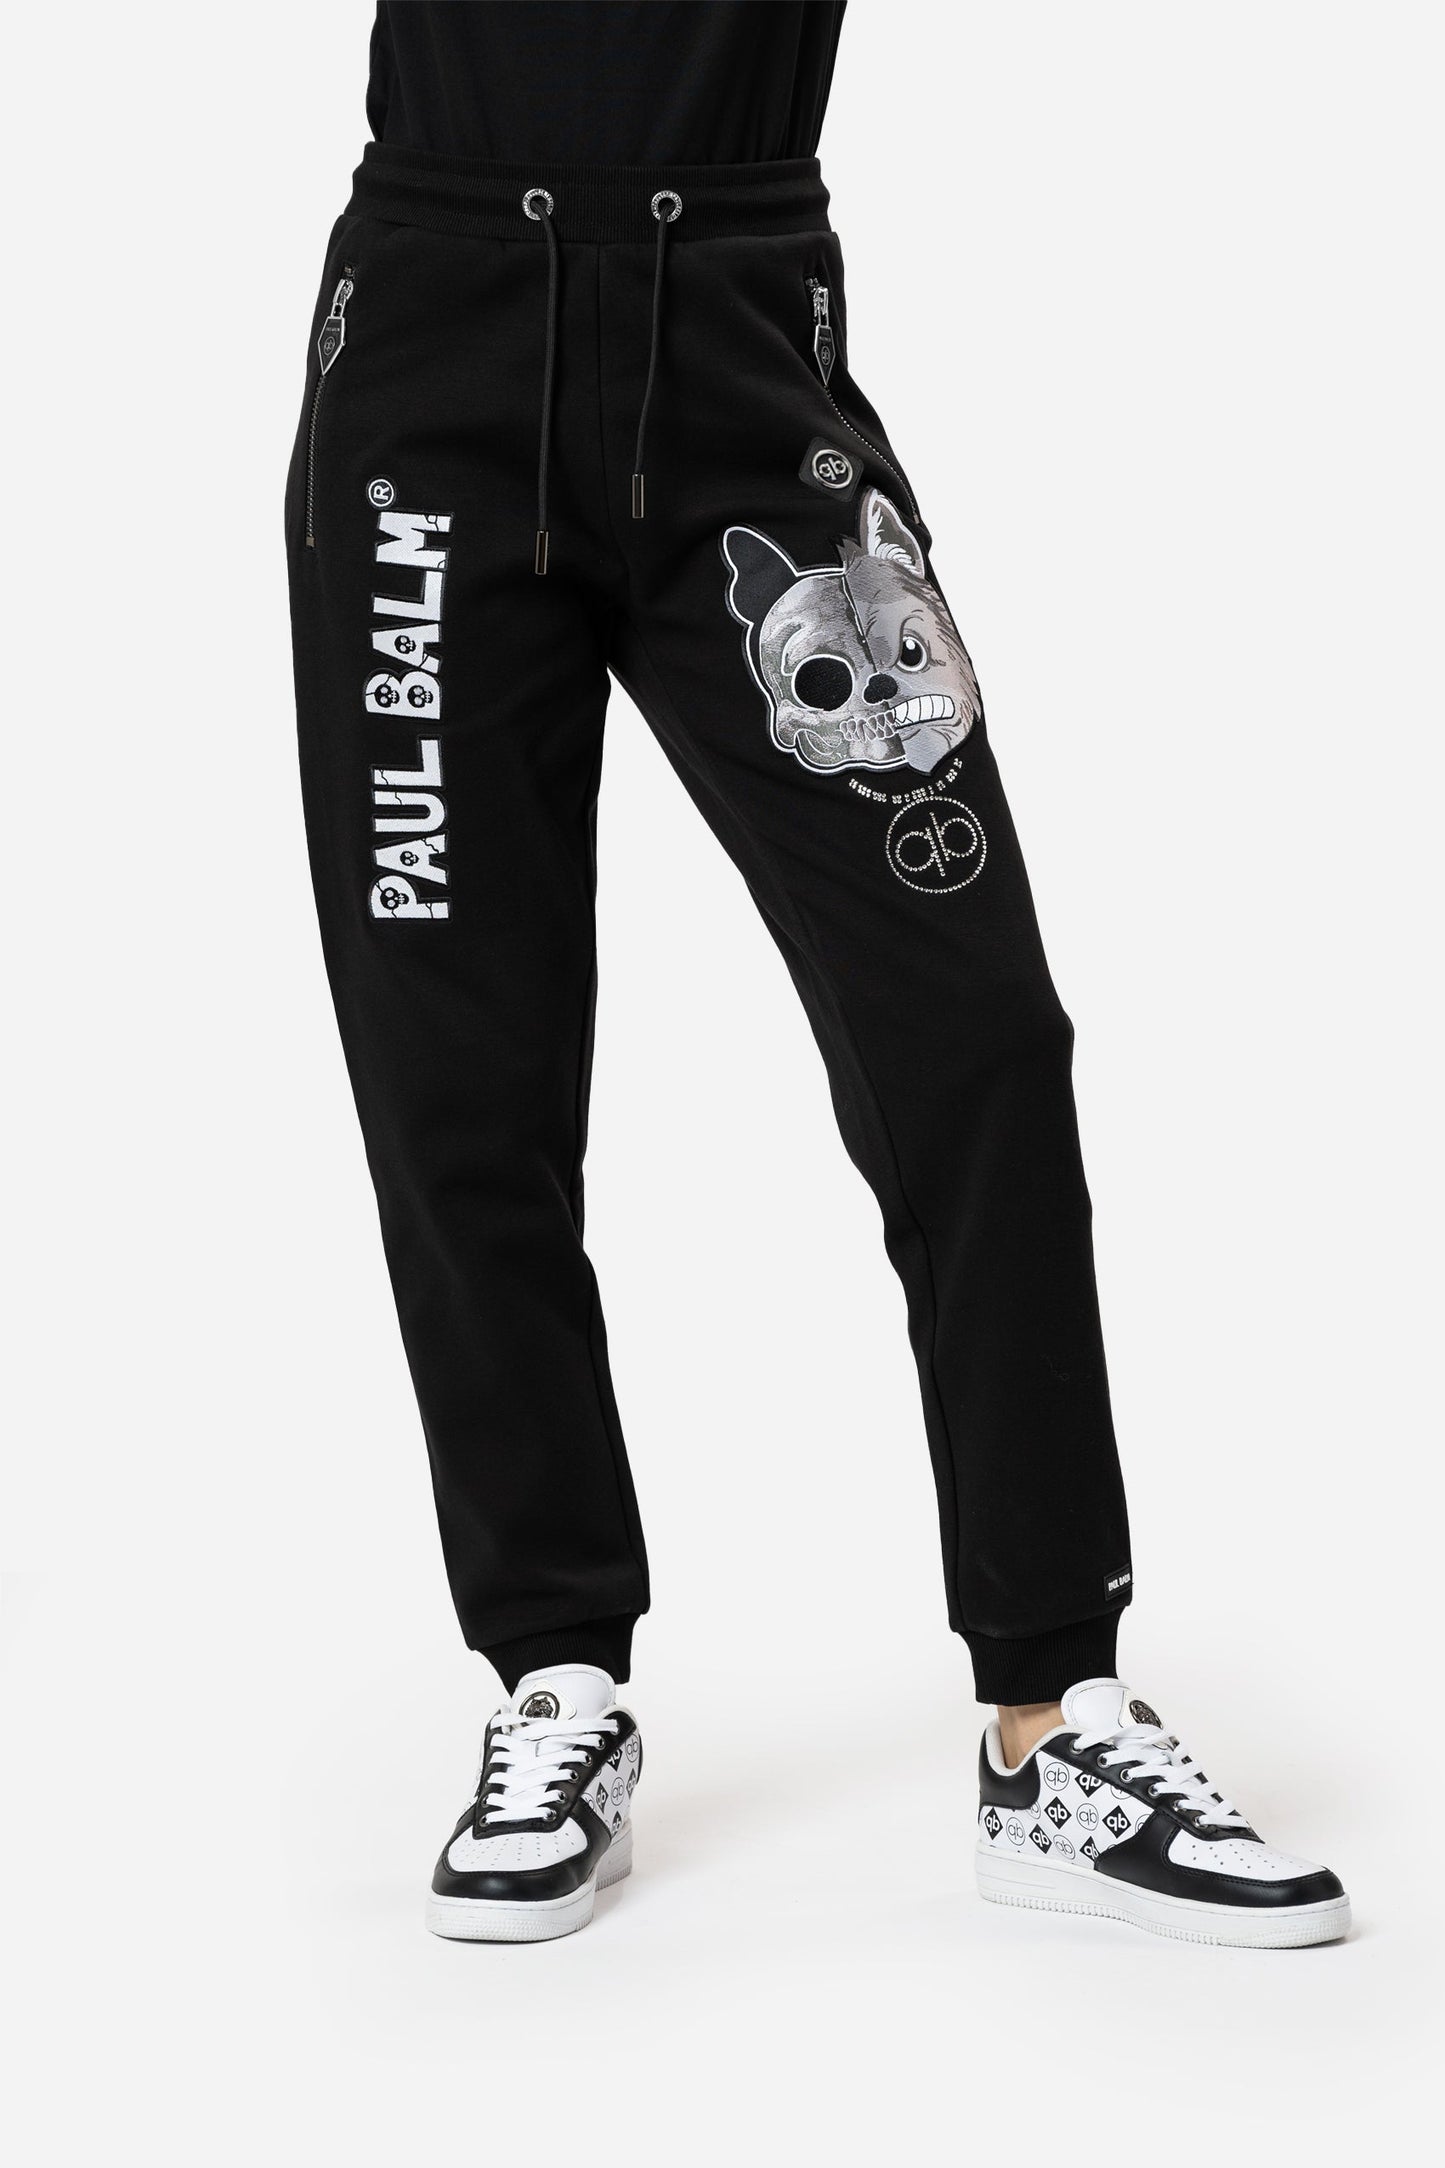 Embroidered Scull Pants - Limited to 300